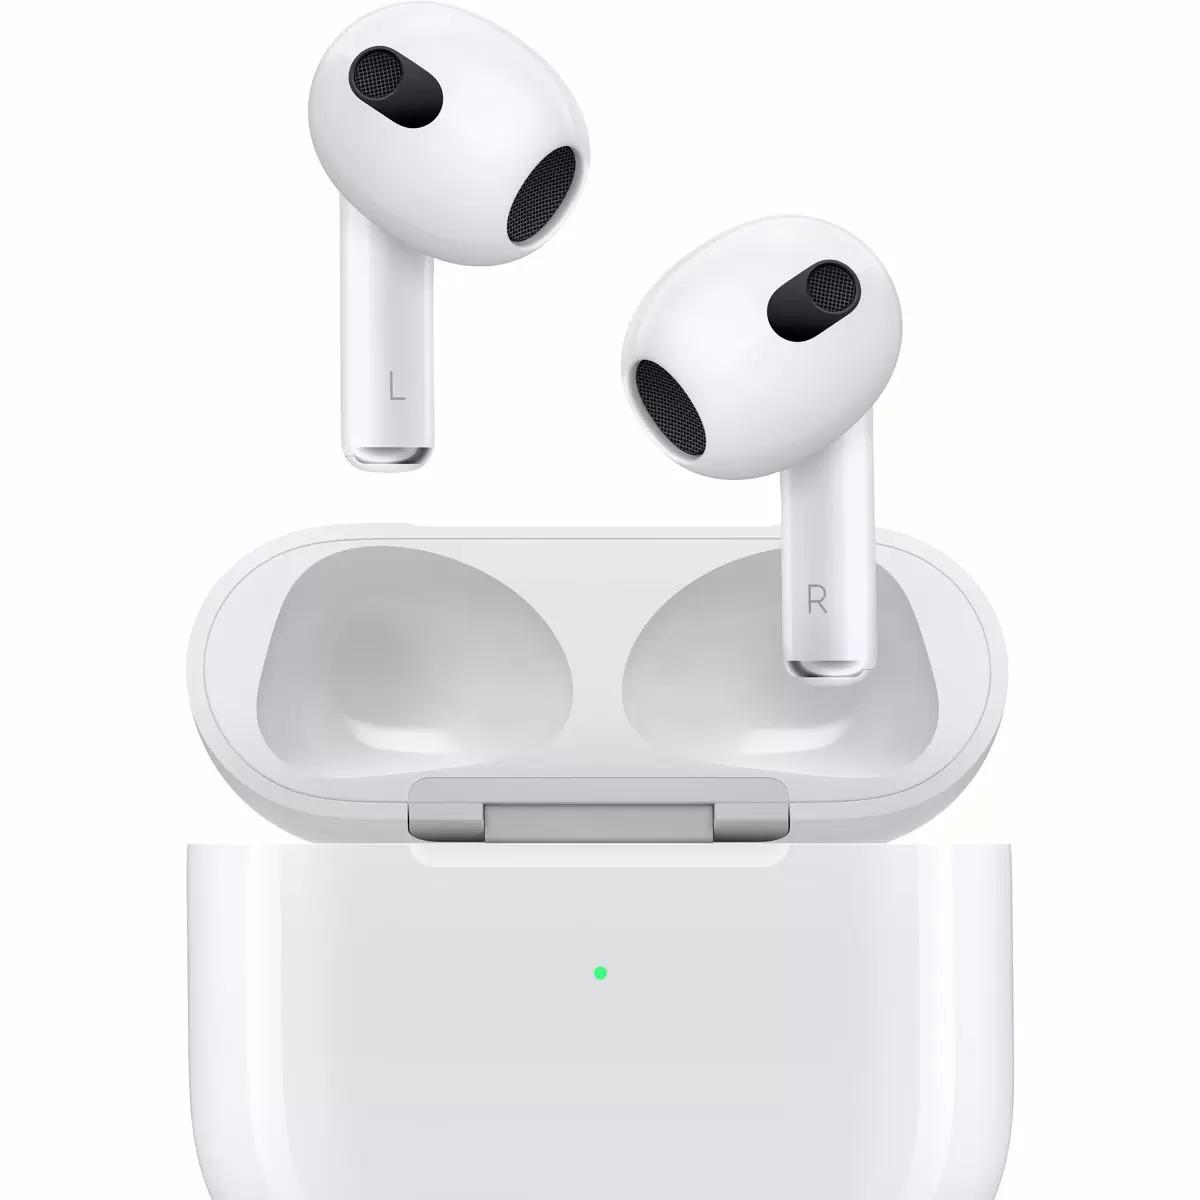 Apple Airpods 3rd Generation Earphones Refurb for $99.99 Shipped